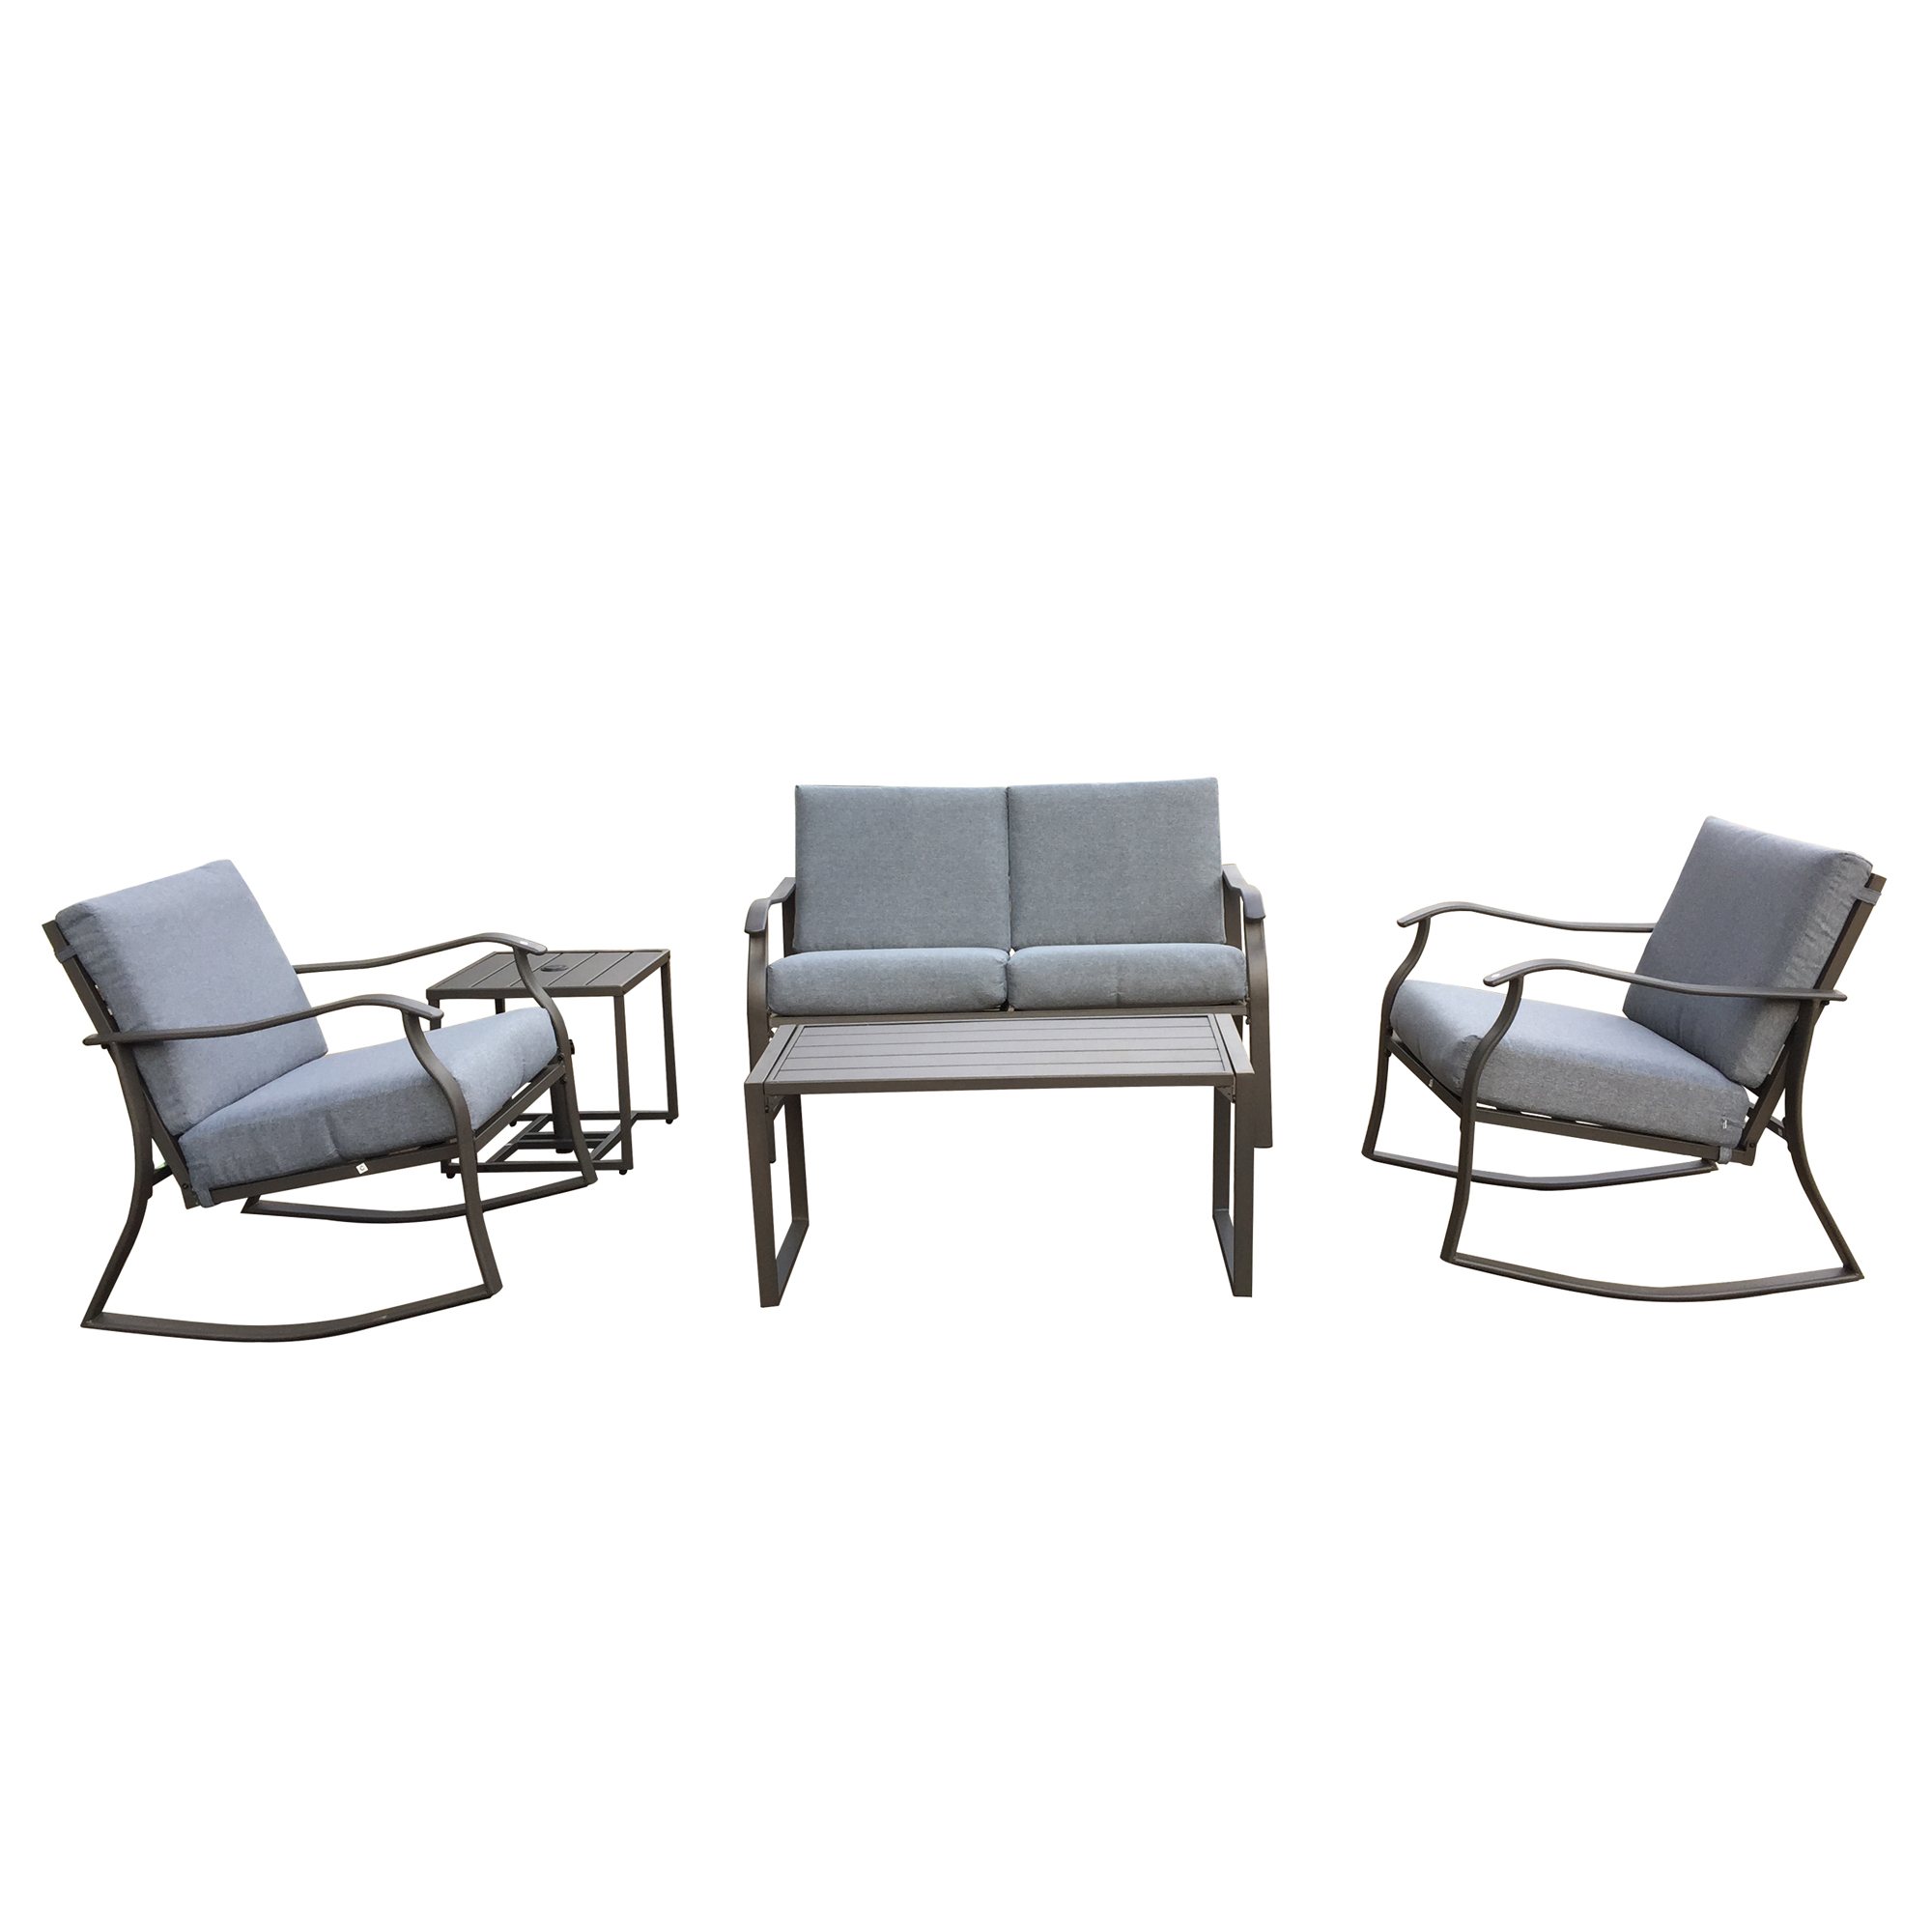 SYNGAR Patio Conversation Set of 5, Metal Outdoor Furniture with 2 Rocking Chairs, Patio Coffee Table, End Table, Loveseat and 4 Chairs Cushions for Garden Backyard Lawn, Gray, LJ3132 - image 2 of 9